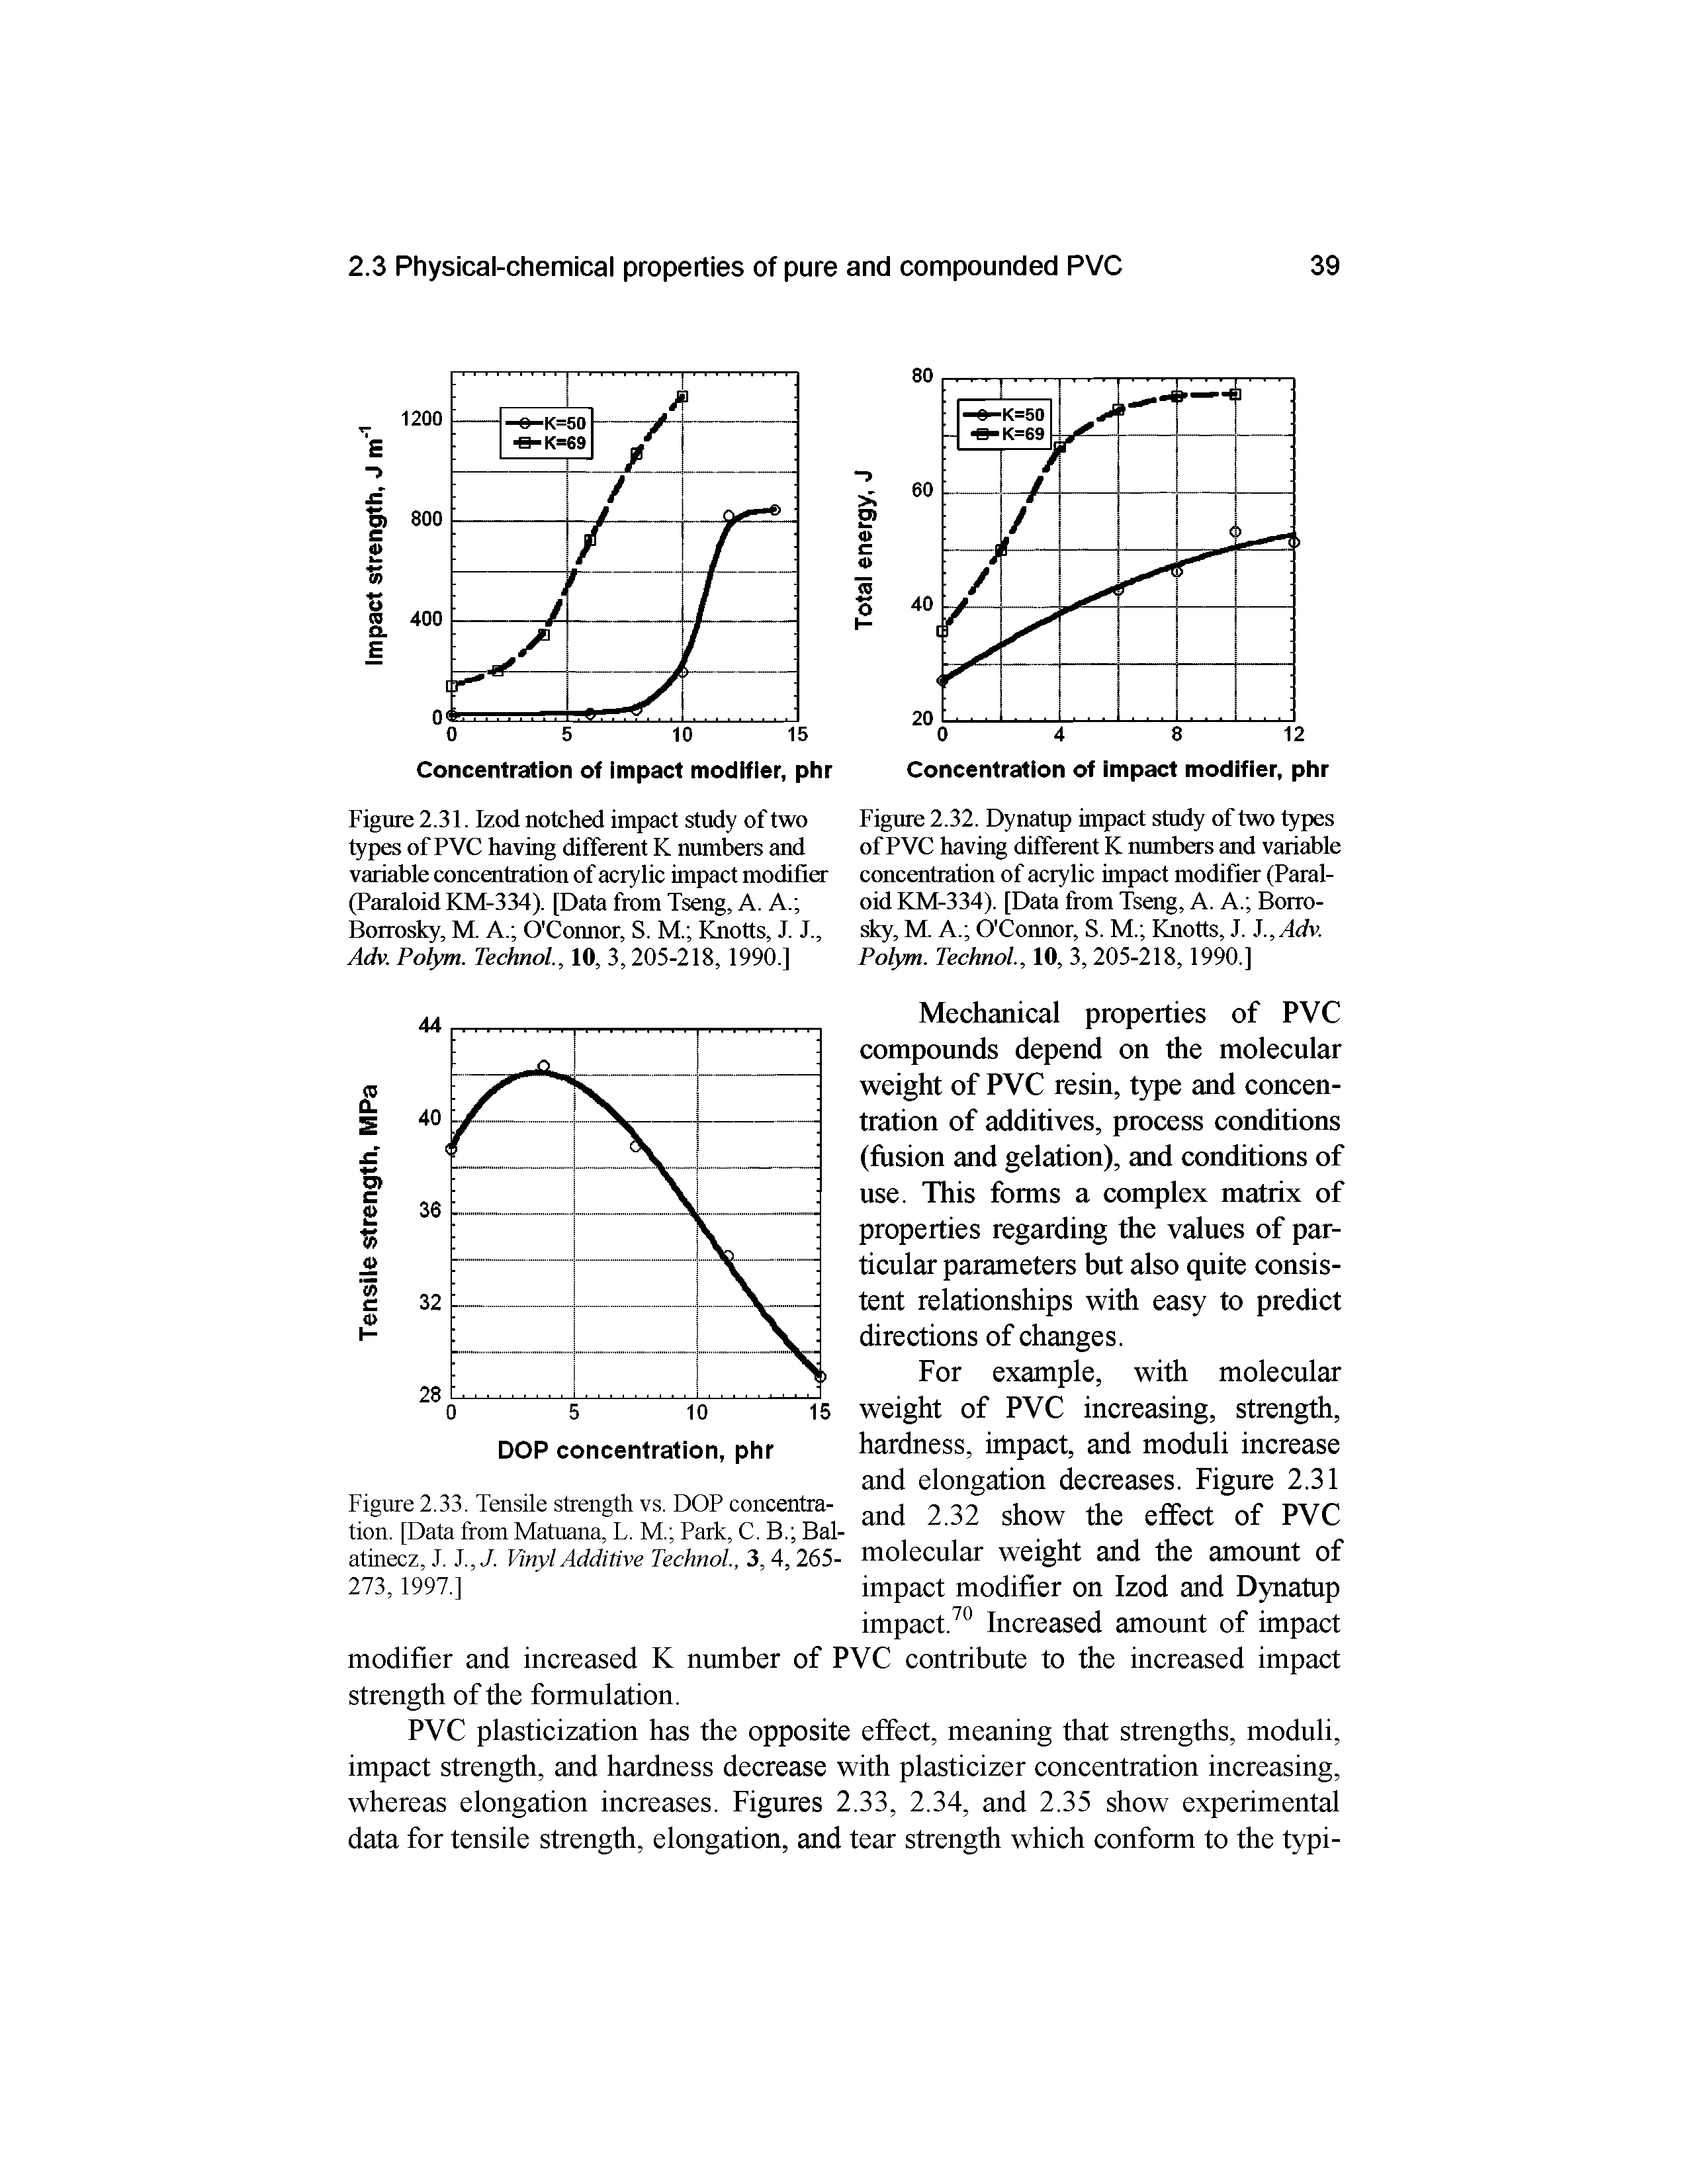 Figure 2.31. Izod notched impact study of two types of PVC having different K numbers and variable concentration of acrylic impact modifier (Paraloid KM-334). [Data from Tseng, A. A. IBorrosky, M. A. O Connor, S. M. Knotts, J. J., Adv. Polym. Technoi, 10, 3,205-218, 1990.]...